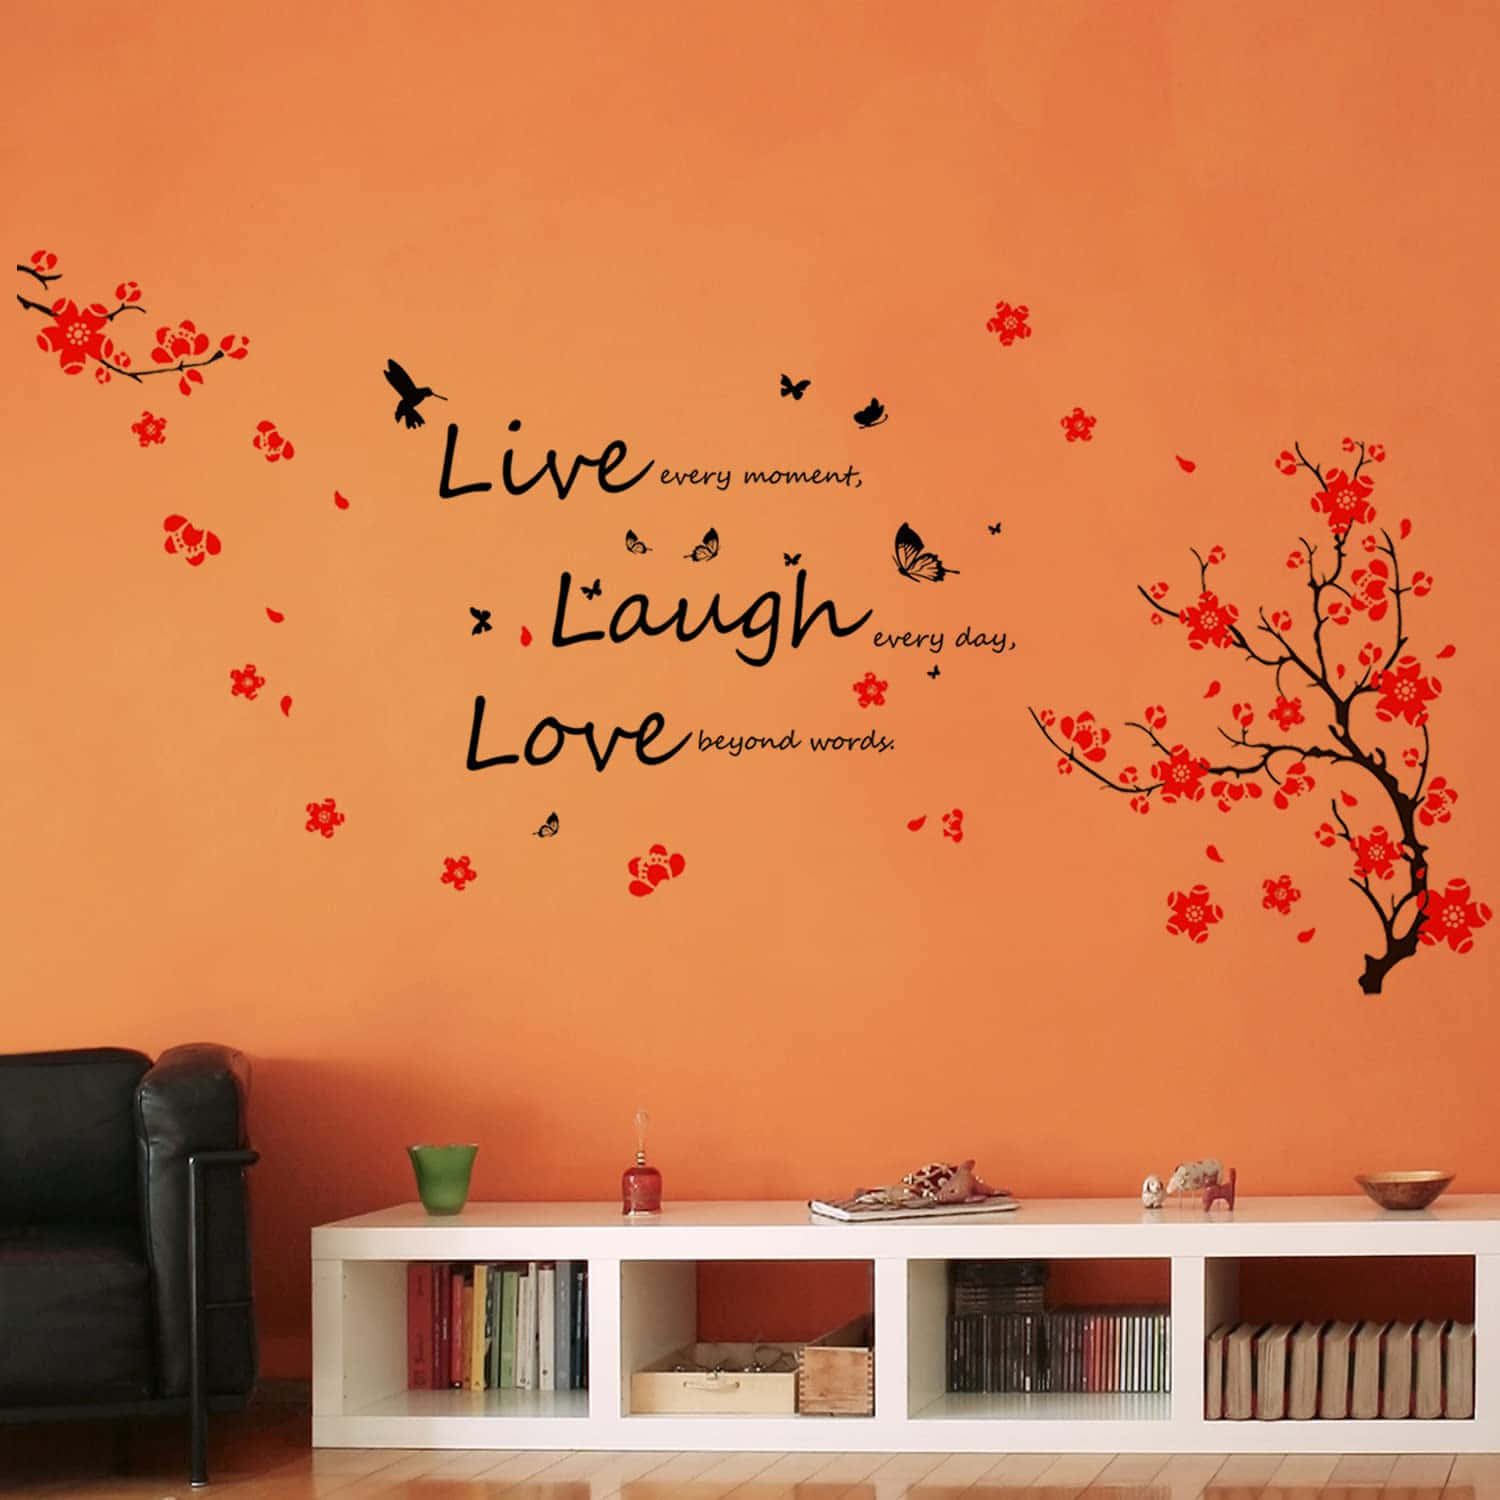 Live Laugh Love Quotes Tattoos. Inside the Home middot; sports,